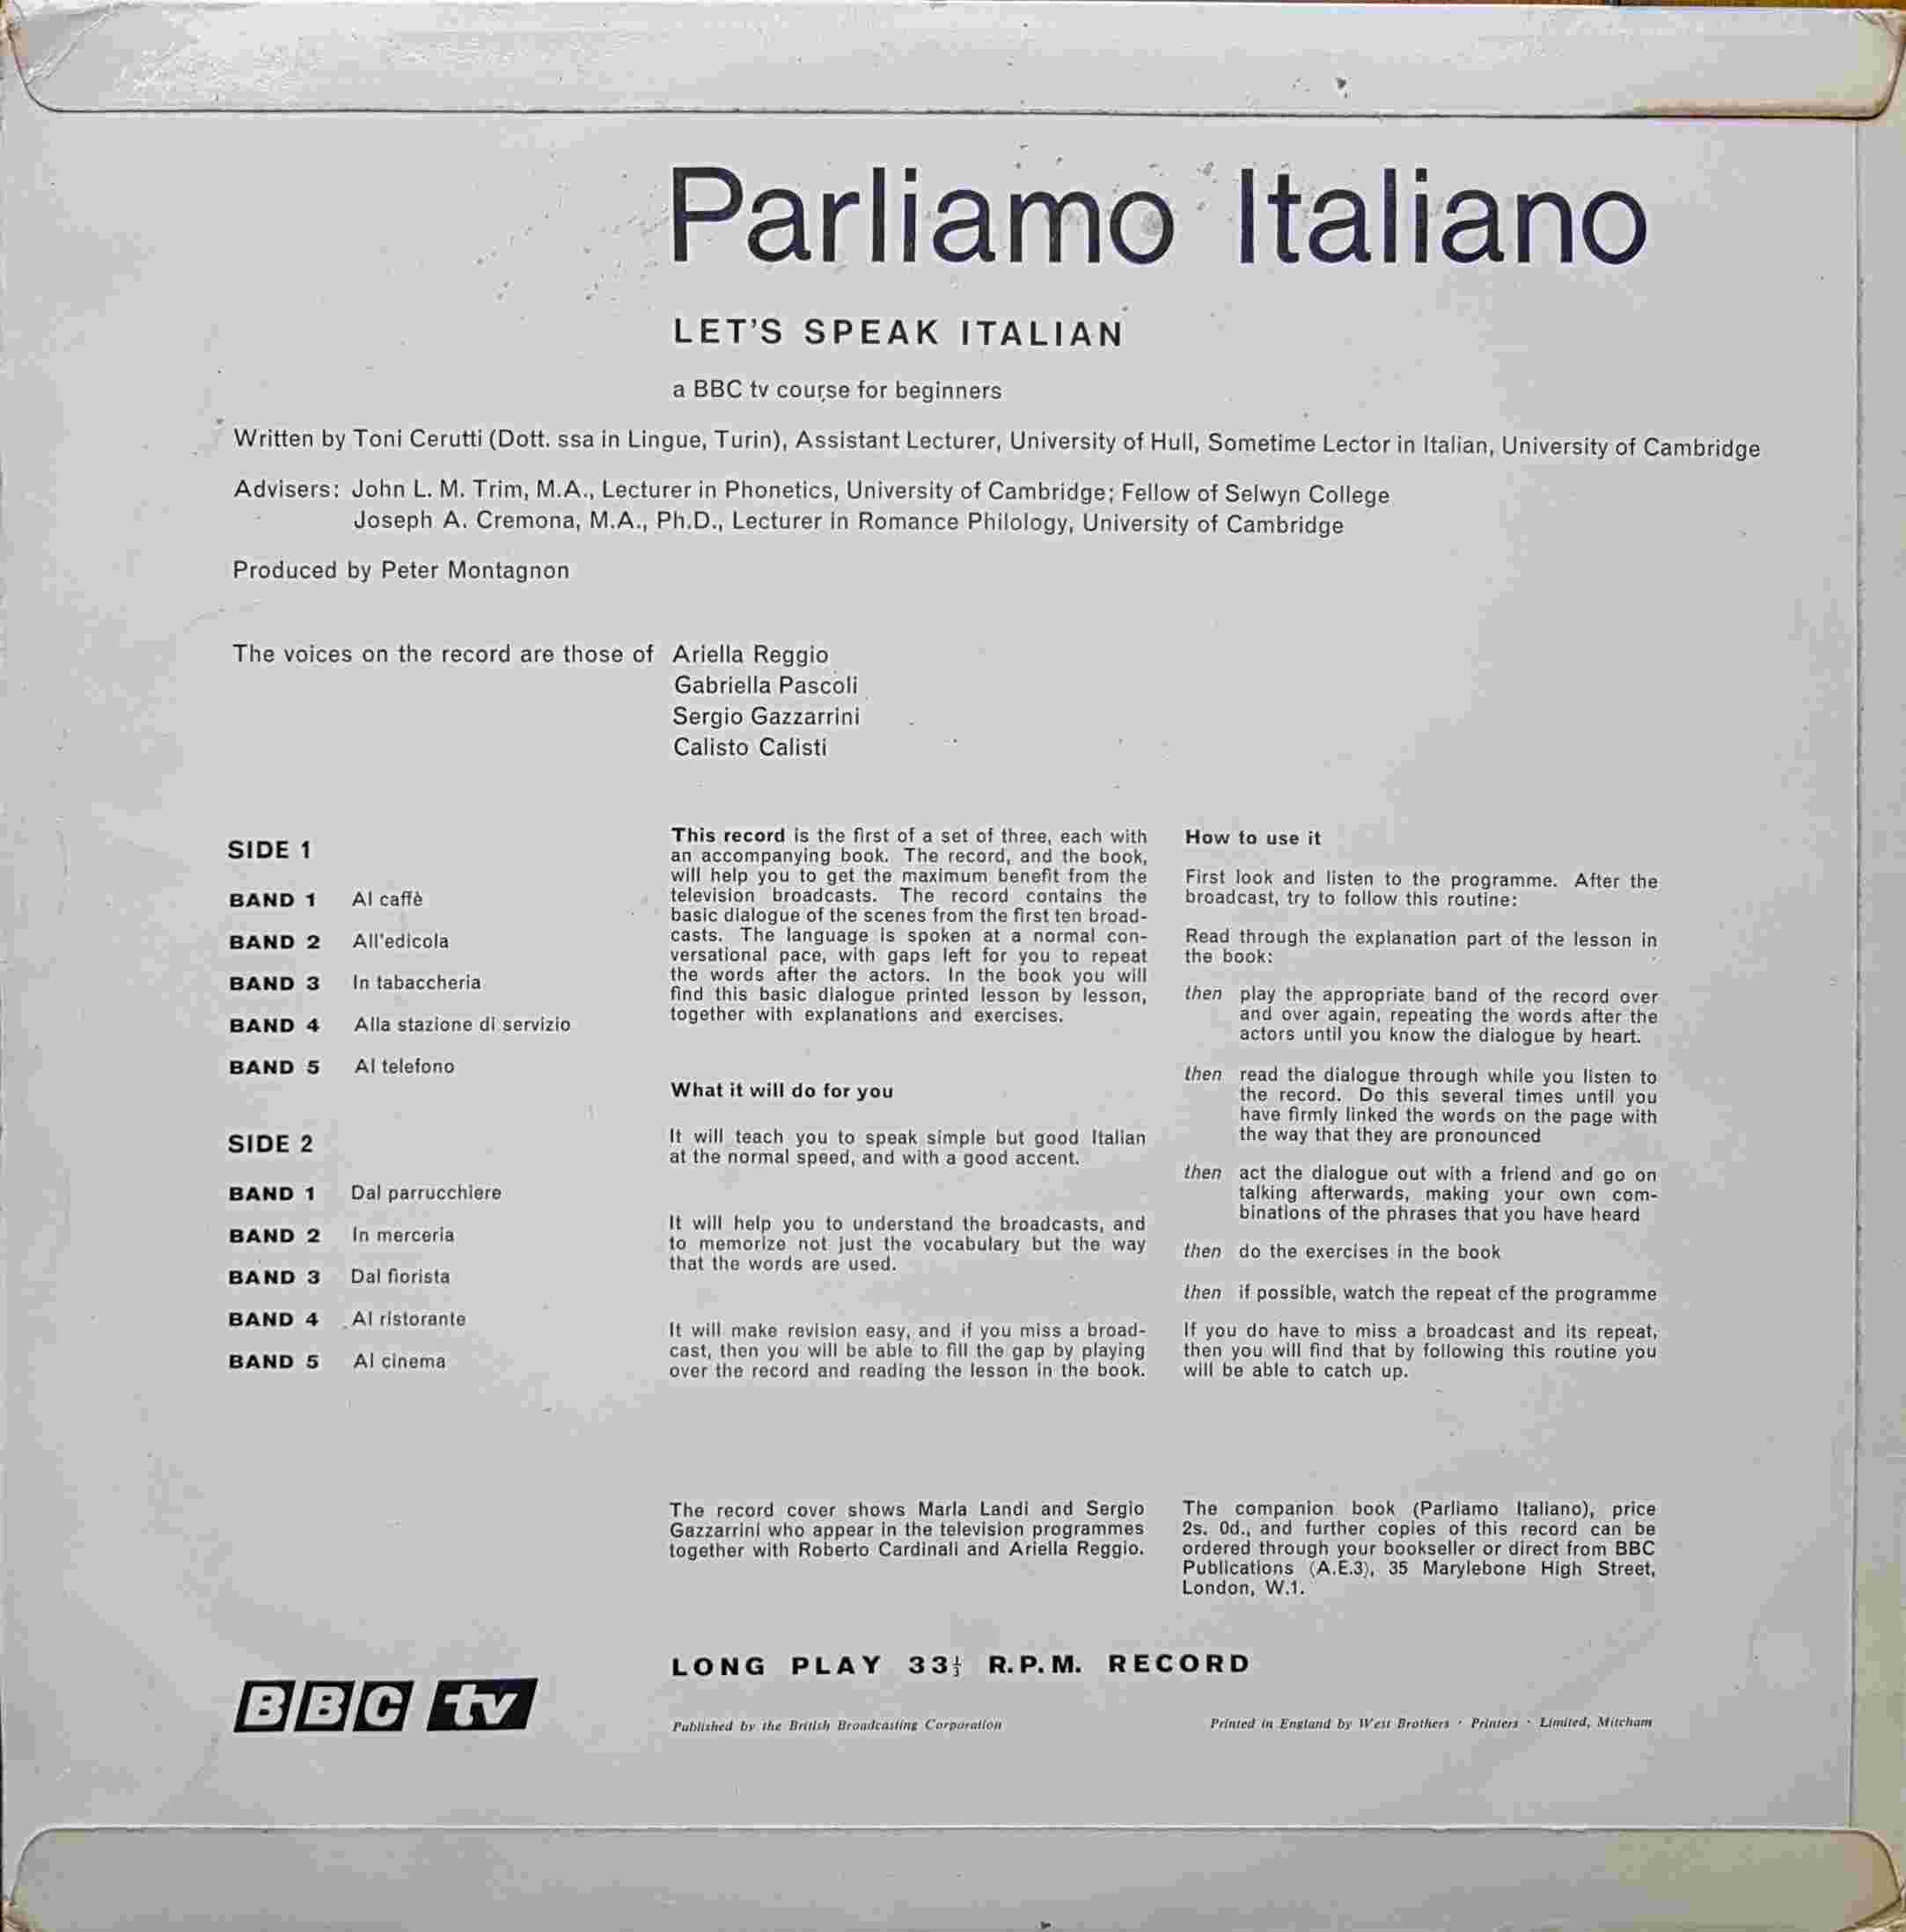 Picture of OP 1/2 Parliamo Italiano - Let's Speak Italian lessons 1 - 10 by artist Toni Cerutti from the BBC records and Tapes library